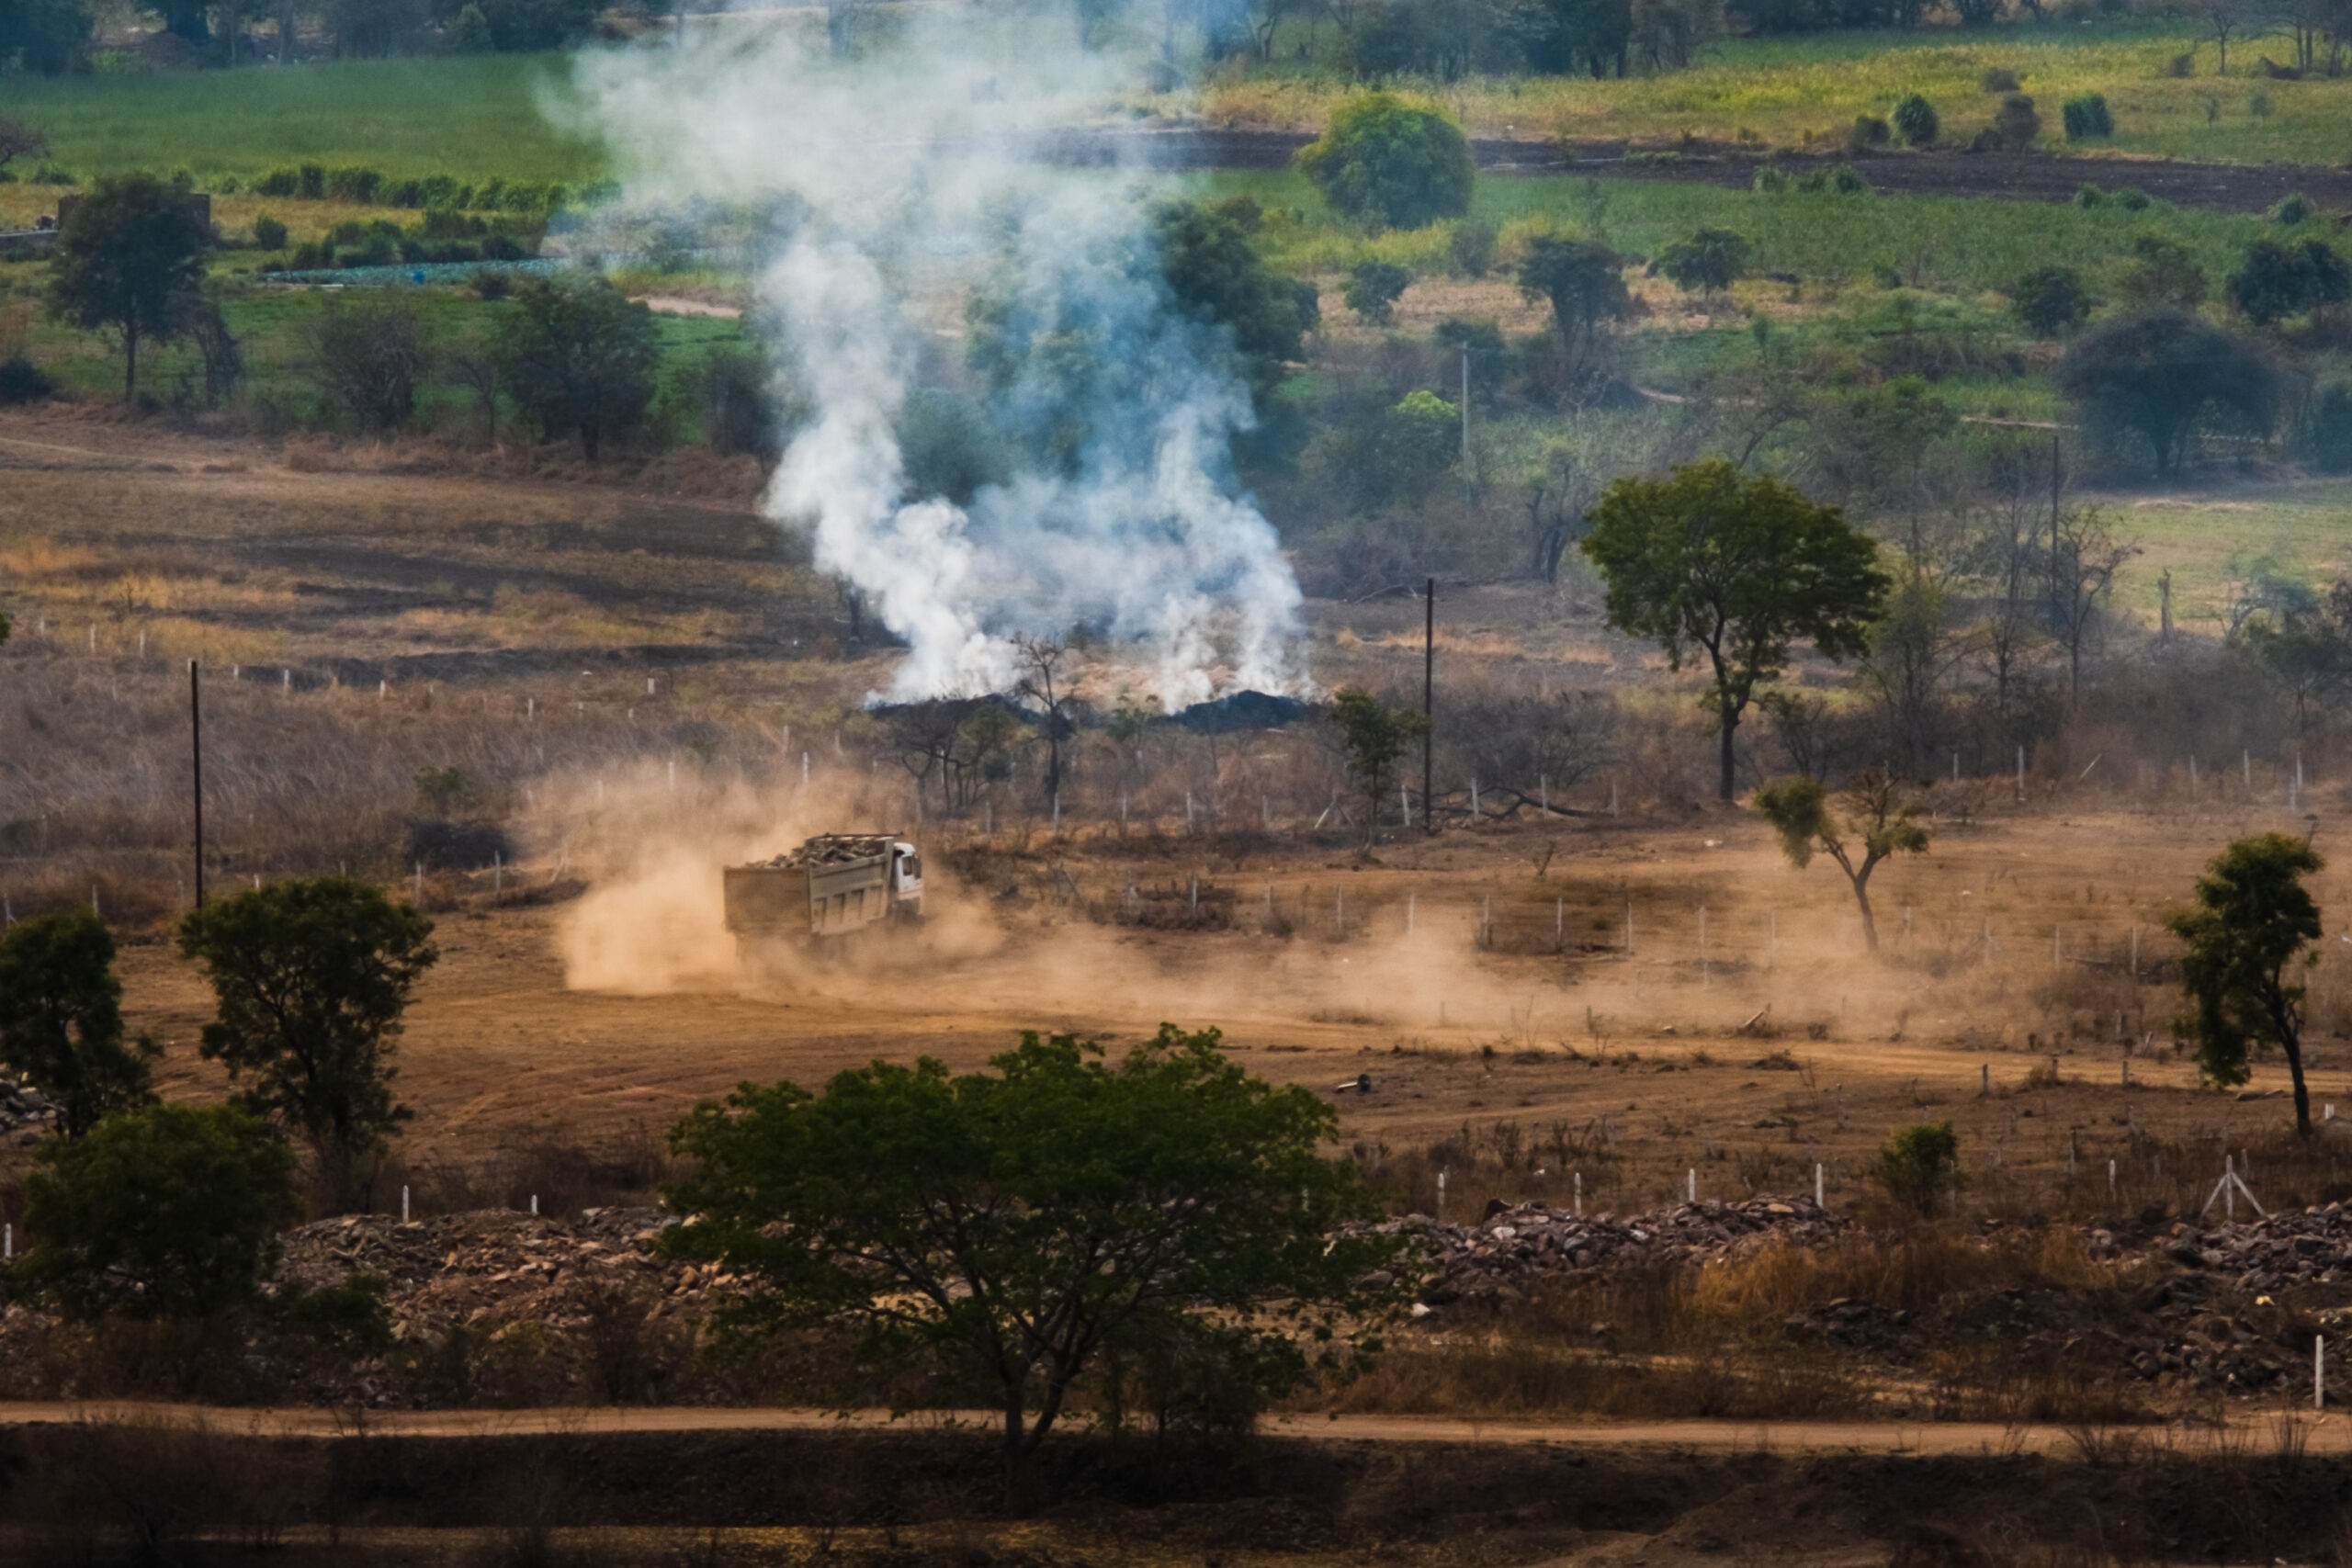 You are currently viewing Constructing roads connected labour markets but increased harmful crop fires in rural India